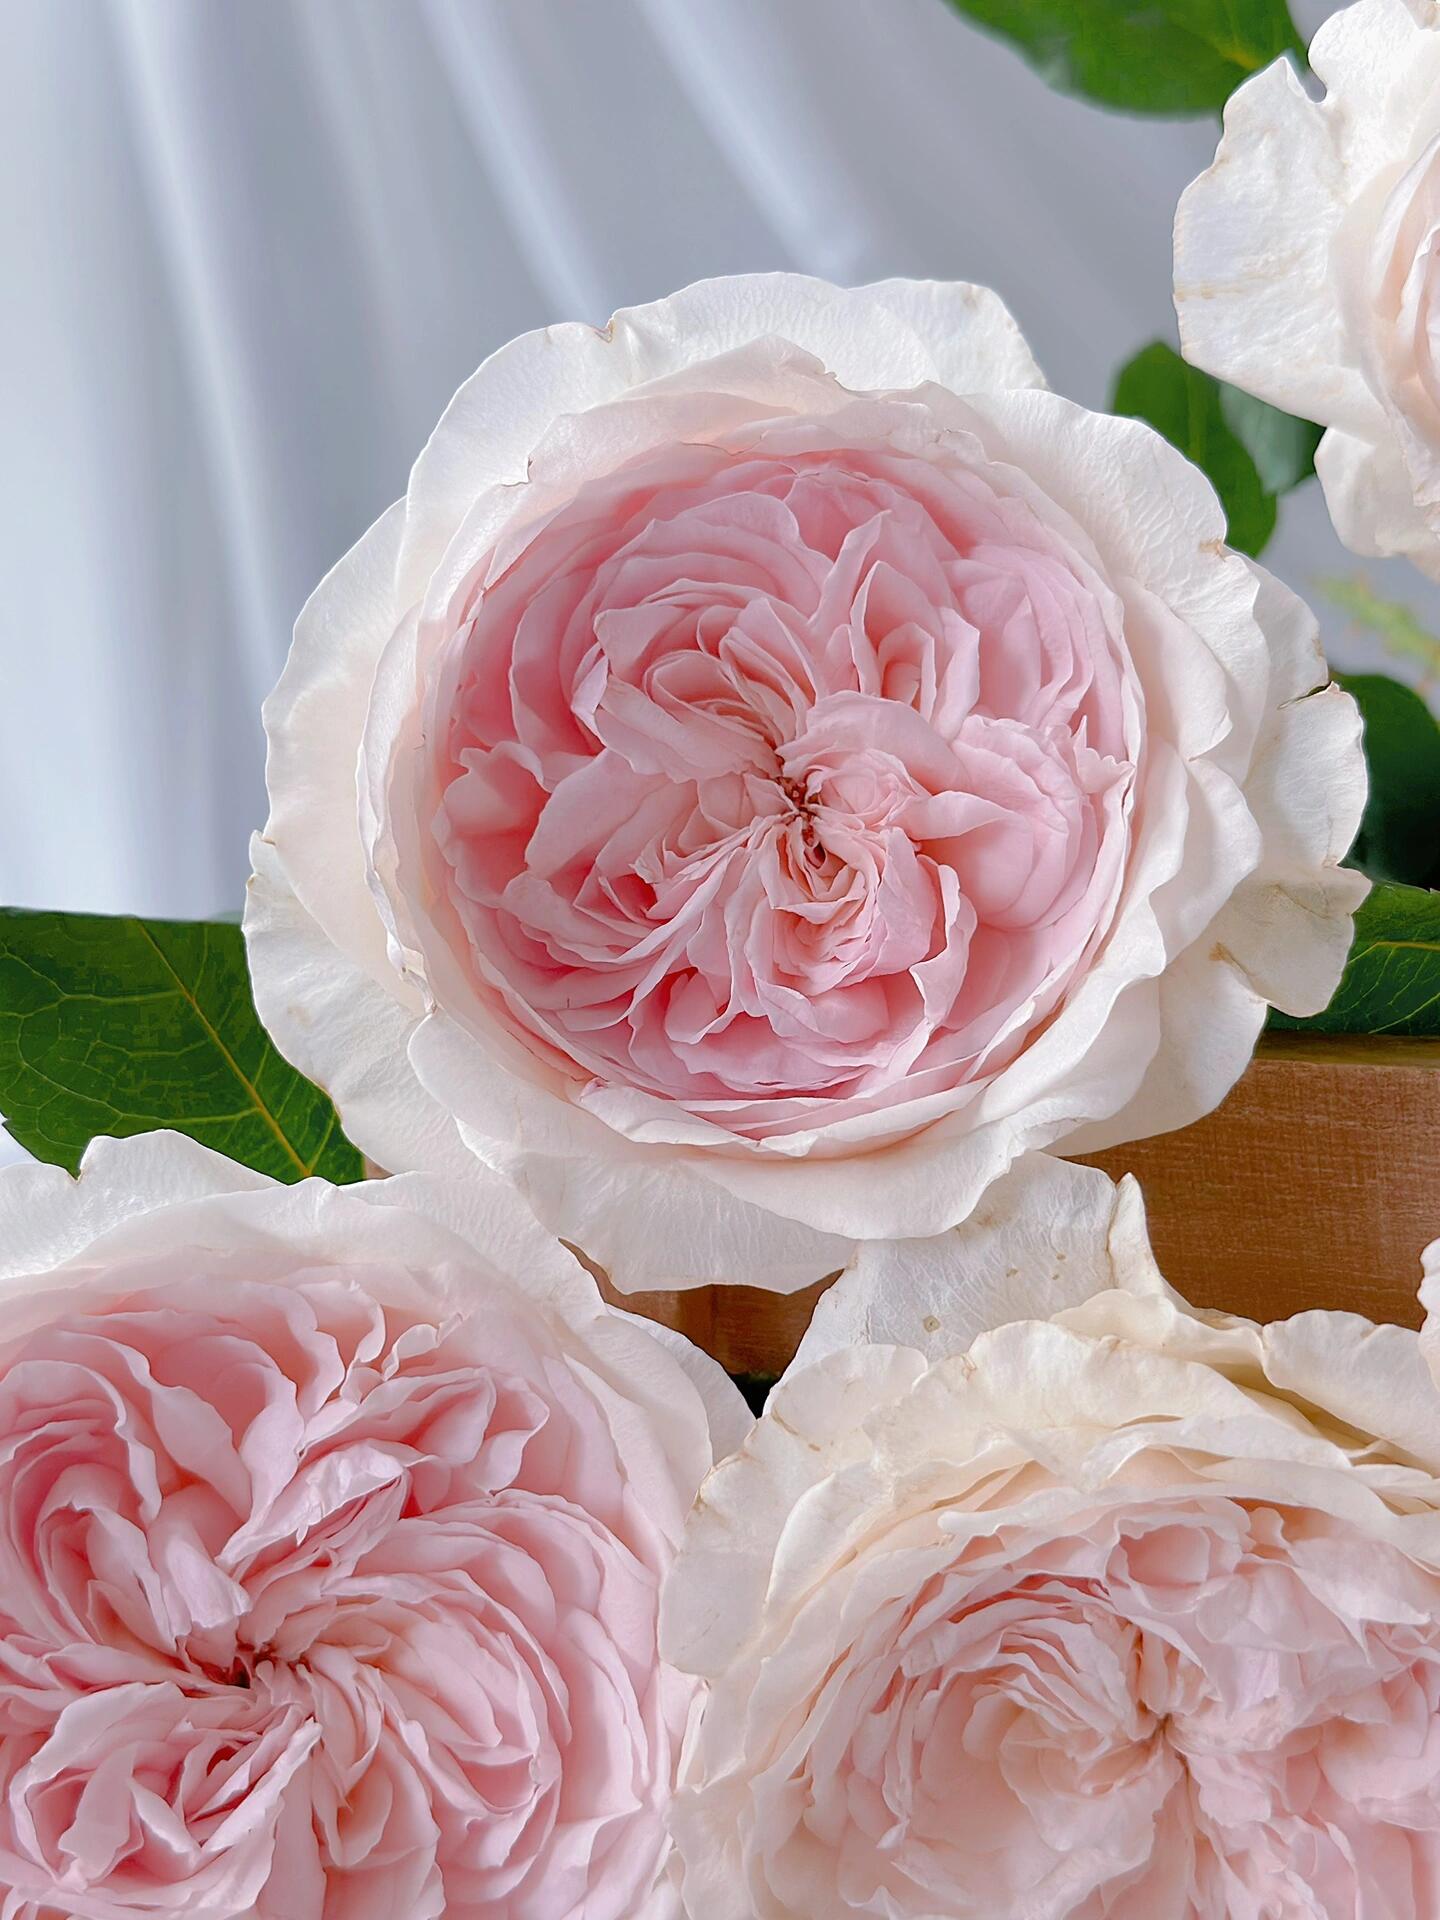 Rose【Les fraises】- 2 Gal+ Own Root Bare Root| Japanese Rare Rose｜草莓奶昔｜Large Bloom| Fragrance| Long flowering period| Ruffle Lace |Perfect